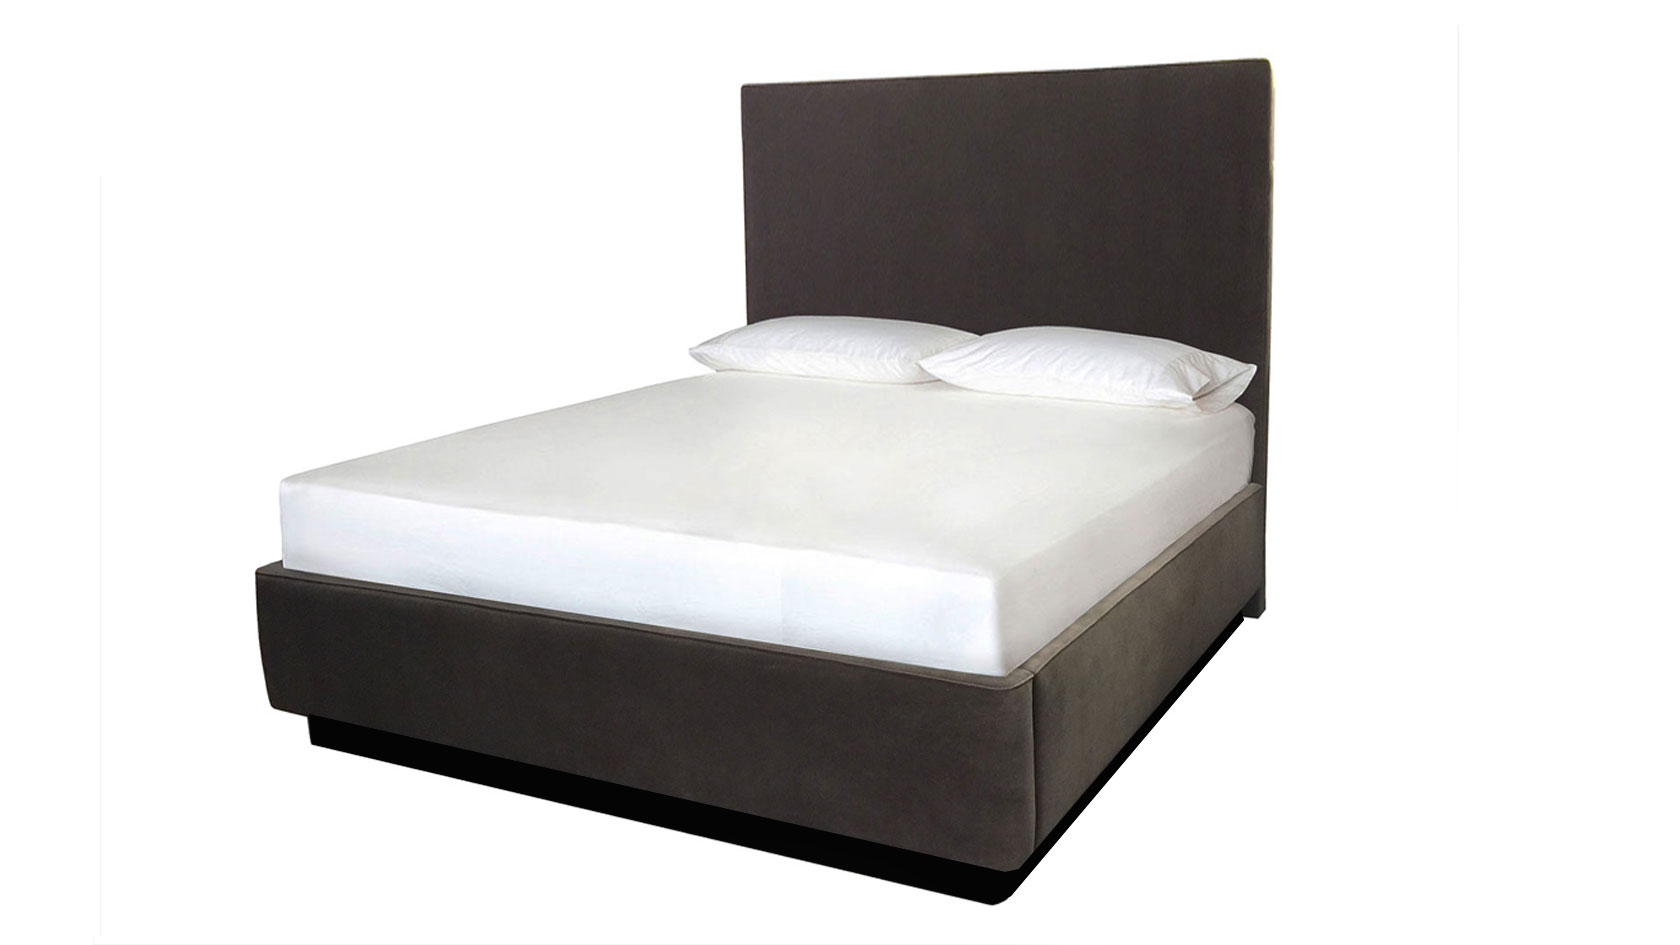 Modena Bed